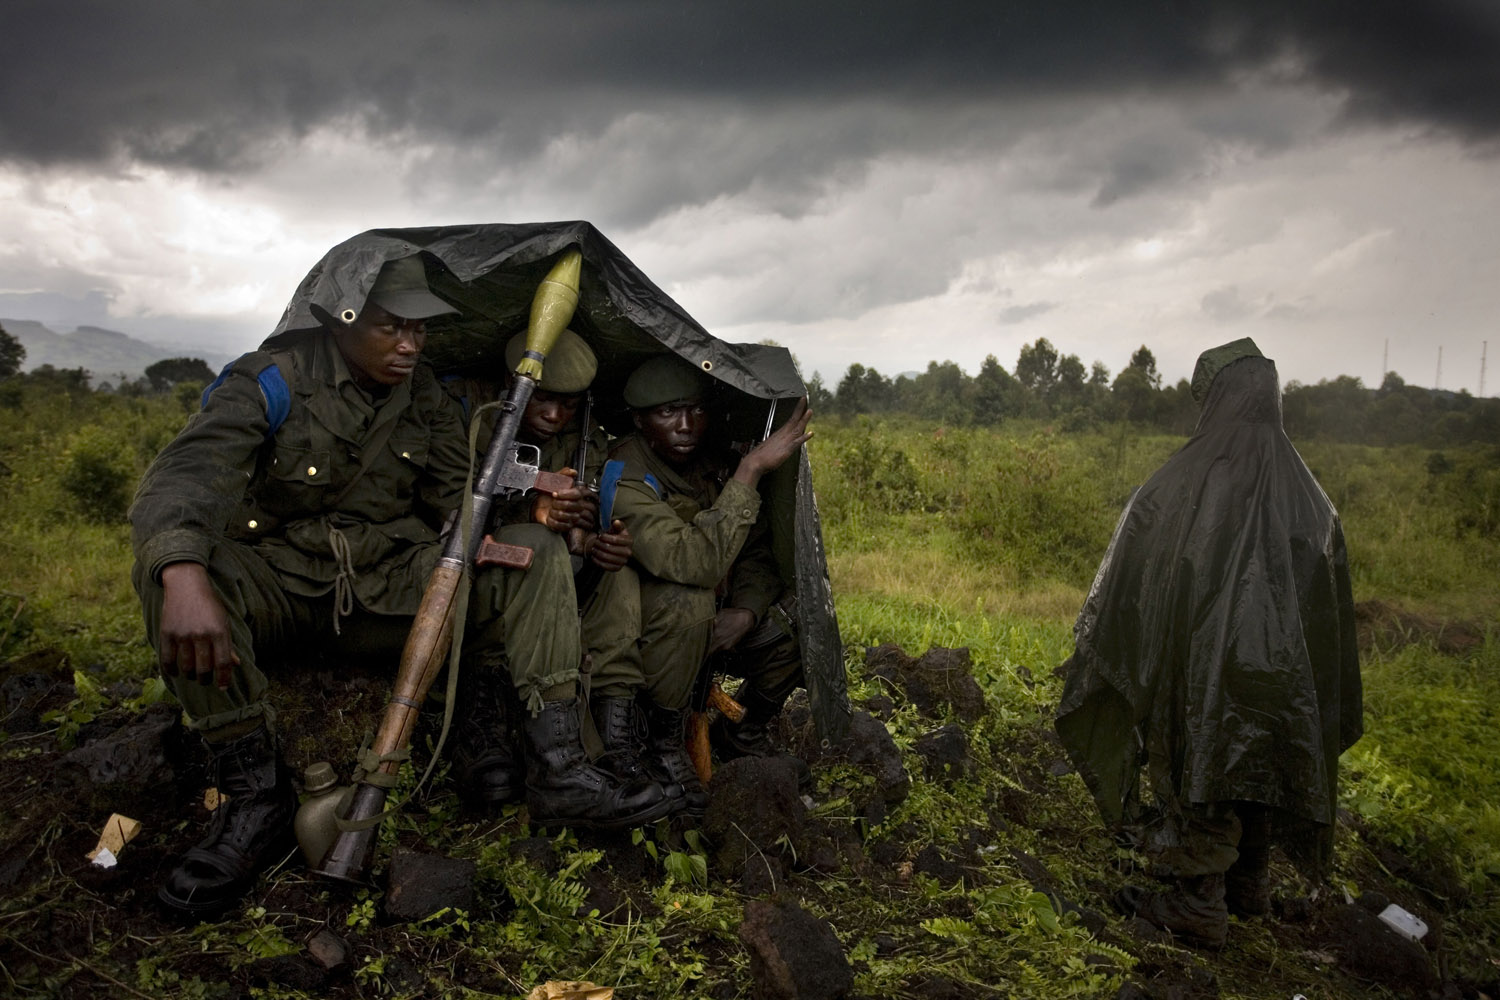 2005: Dominic NahrNorth Kivu, Kibati, Democratic Republic of the Congo, 2008. Four Congolese government soldiers shelter from the rain on the front line about five kilometers north of Kibati. CNDP Rebels and government soldiers are separated by less then half a kilometer and fighting flares up regularly.
                               I remember how I felt proud to be a part of such a great group of people—photographers who truly believe in what they are doing. Even though our community is small, we remember the ones who came before us with great pride and we take care or are taken care of by the ones who are still around.
                              When the balloons flew for the fallen photographers I really felt a strong feeling of responsibility to the years that were ahead of me. The workshop gave me an opportunity to see what was out there, from stories to all the editors. In the years that followed I knew I had to produce strong untold stories, and with these essays push my work out the same way we had done at the workshop.Half the battle is making the images, the other half is showing up and making sure they find their way to the surface.